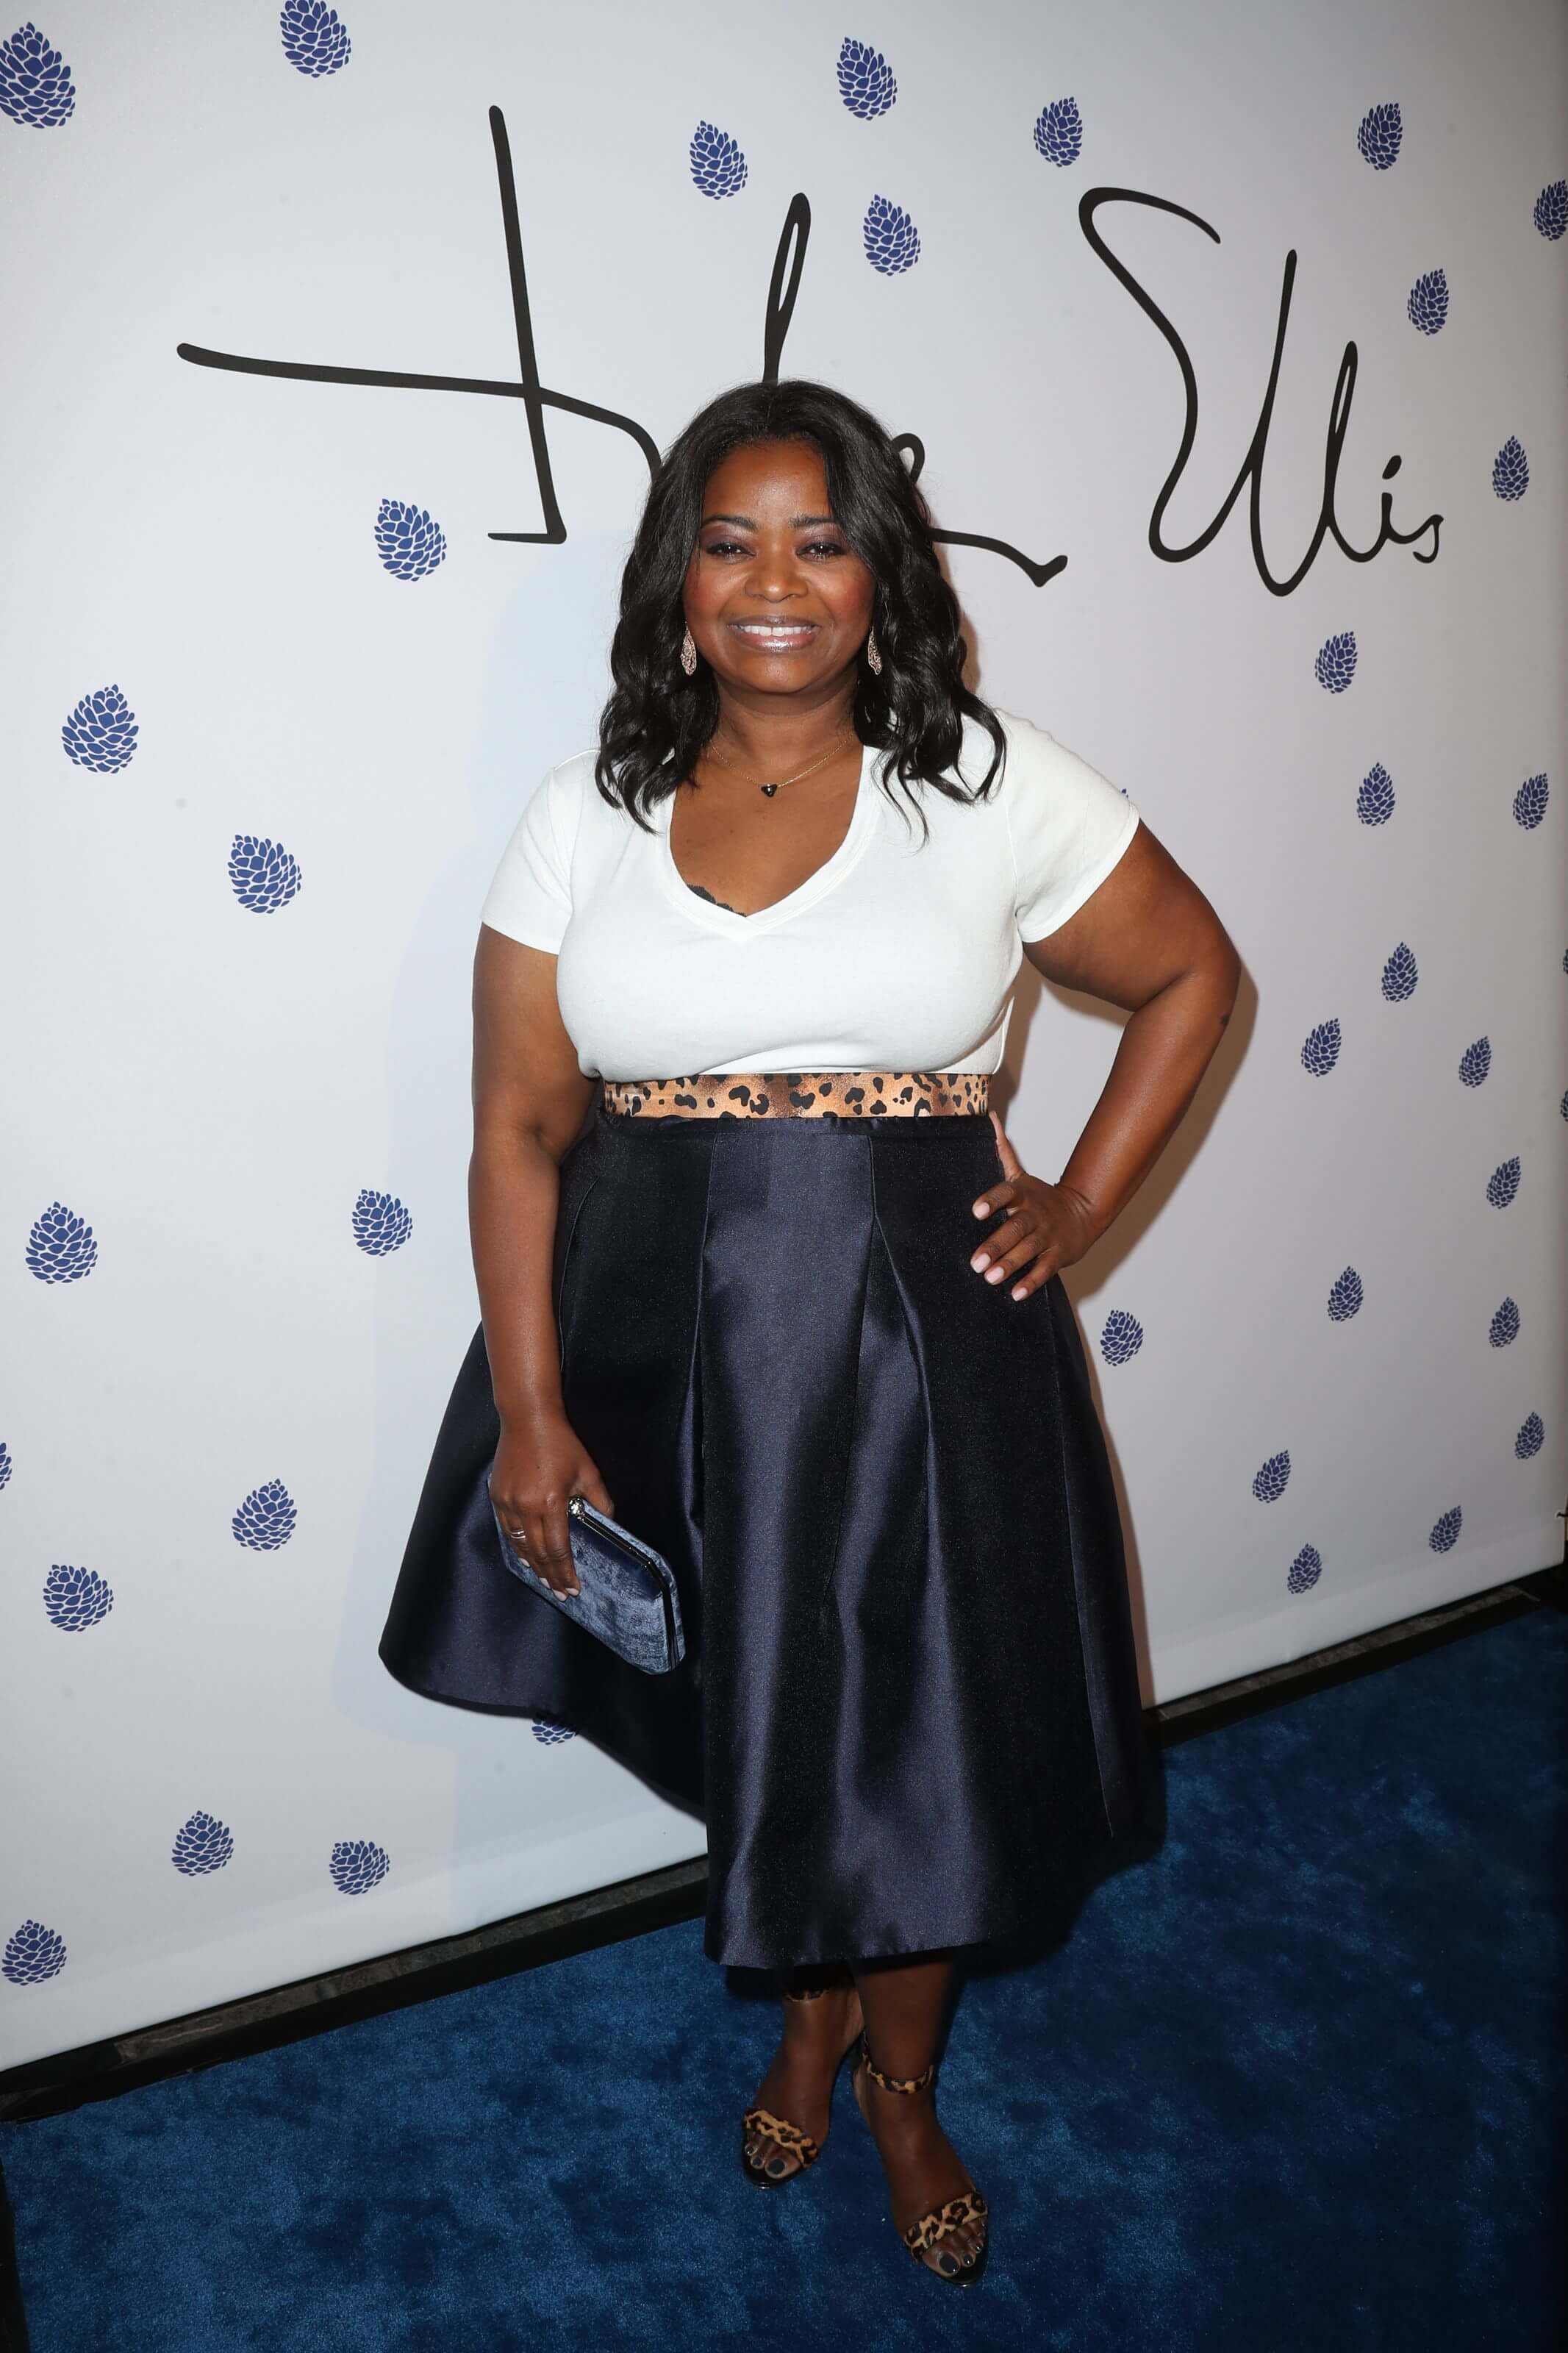 Hot Picture Of Octavia Spencer Which Will Keep You Up